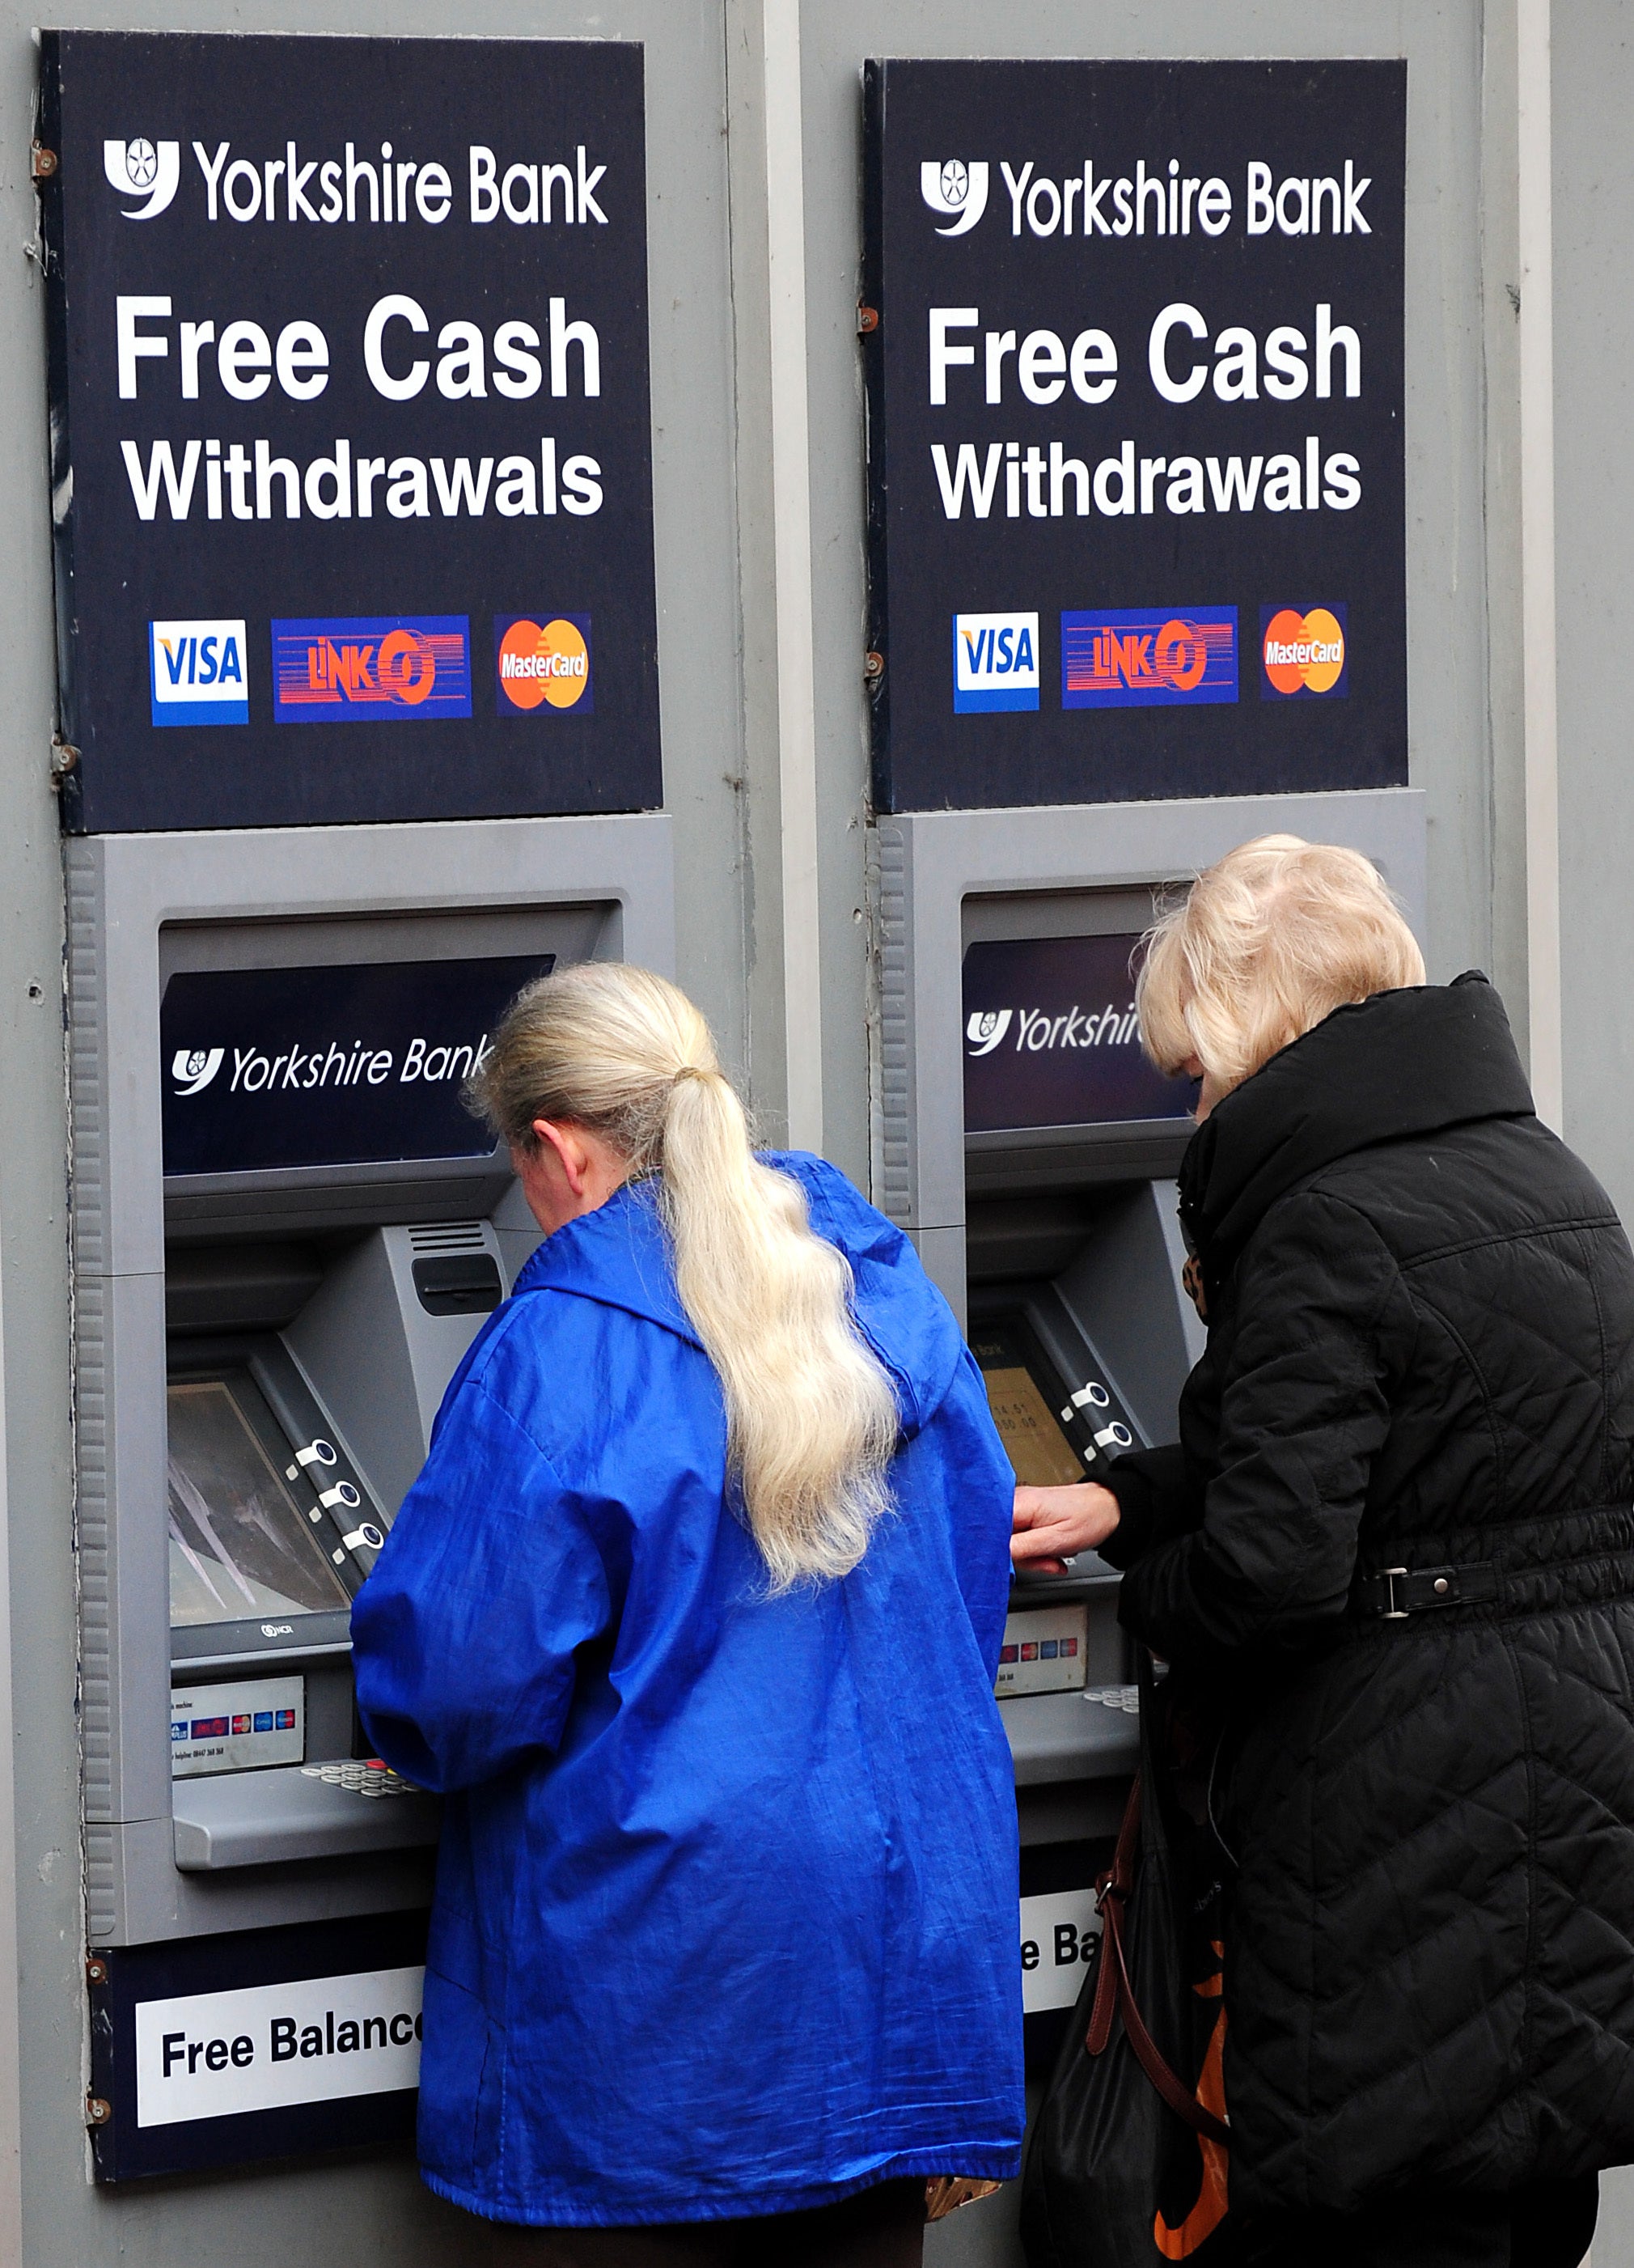 Nearly £2 billion is set to be withdrawn from ATMs as people celebrate the Queen’s Platinum Jubilee, cash machine network Link predicts (Rui Vieira/PA)